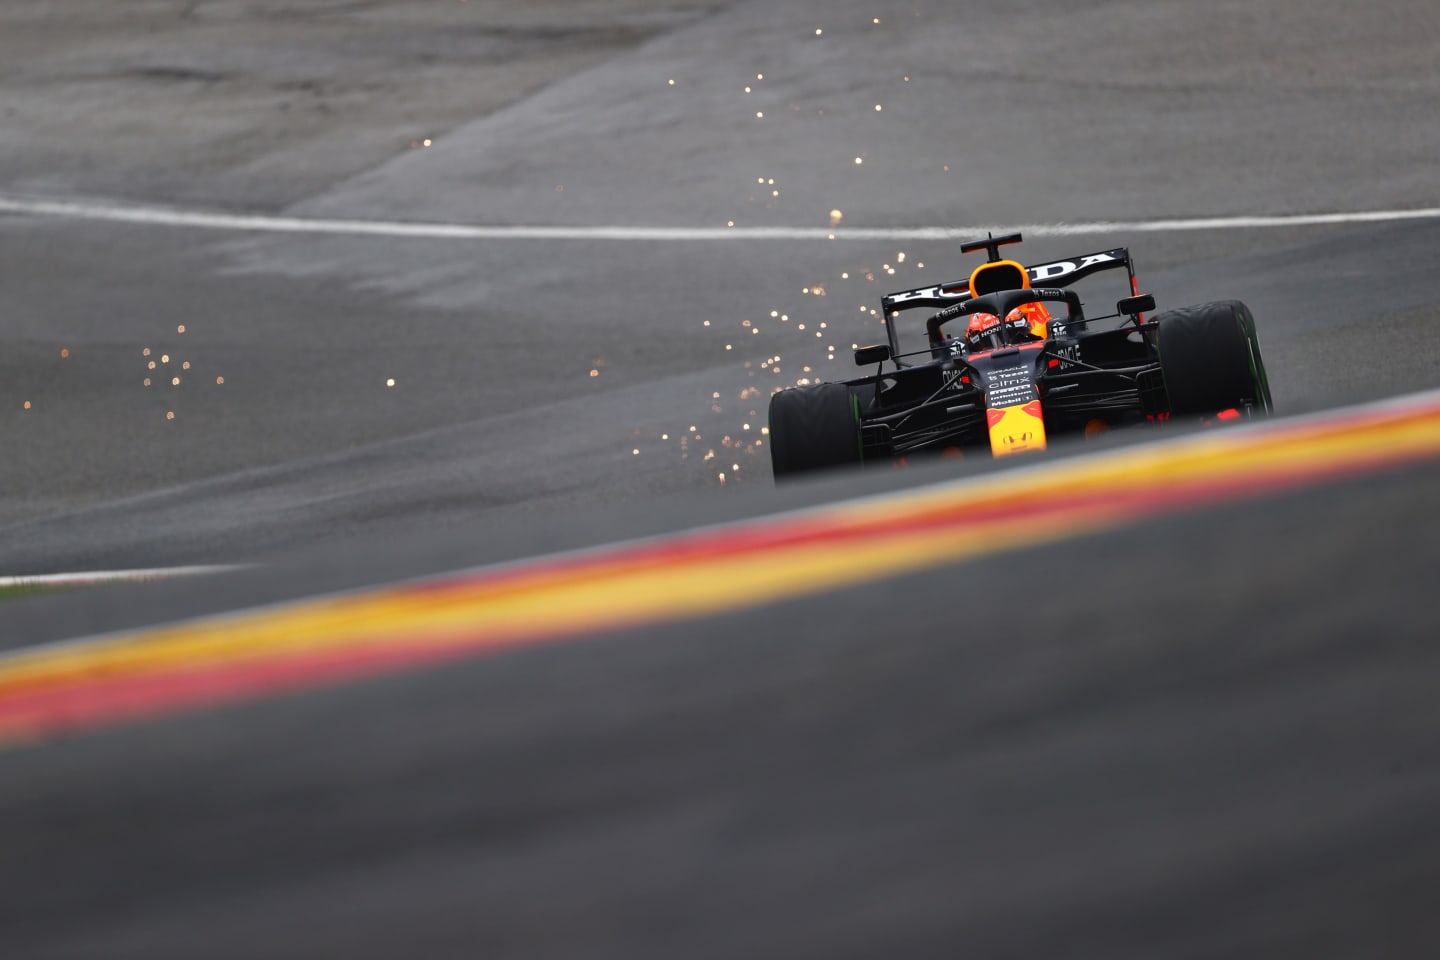 SPA, BELGIUM - AUGUST 28: Max Verstappen of the Netherlands driving the (33) Red Bull Racing RB16B Honda during final practice ahead of the F1 Grand Prix of Belgium at Circuit de Spa-Francorchamps on August 28, 2021 in Spa, Belgium. (Photo by Dan Istitene - Formula 1/Formula 1 via Getty Images)